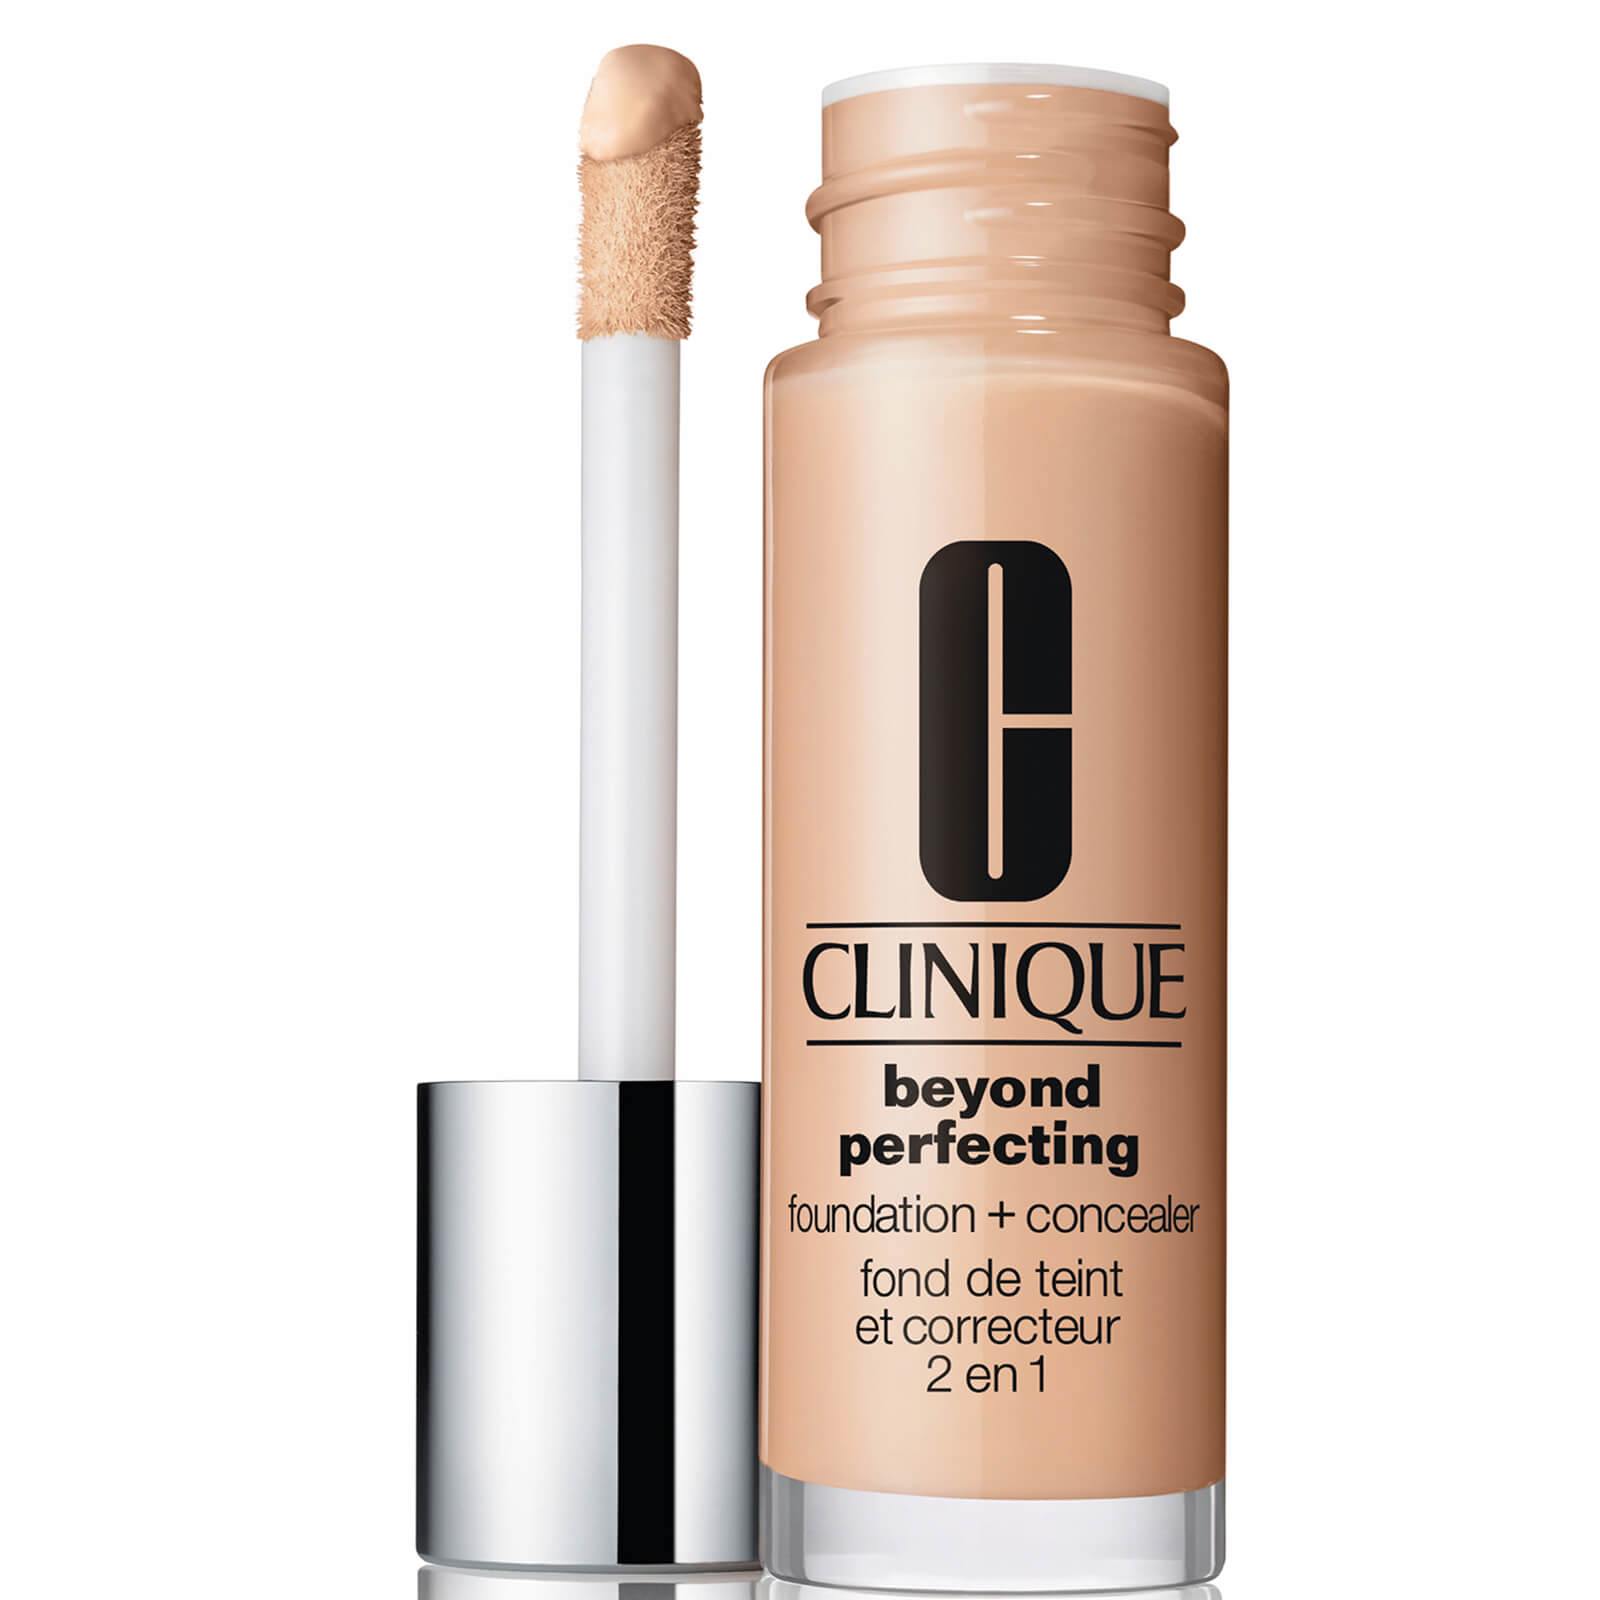 Clinique Beyond Perfecting Foundation and Concealer 30ml (Various Shades) - Fair